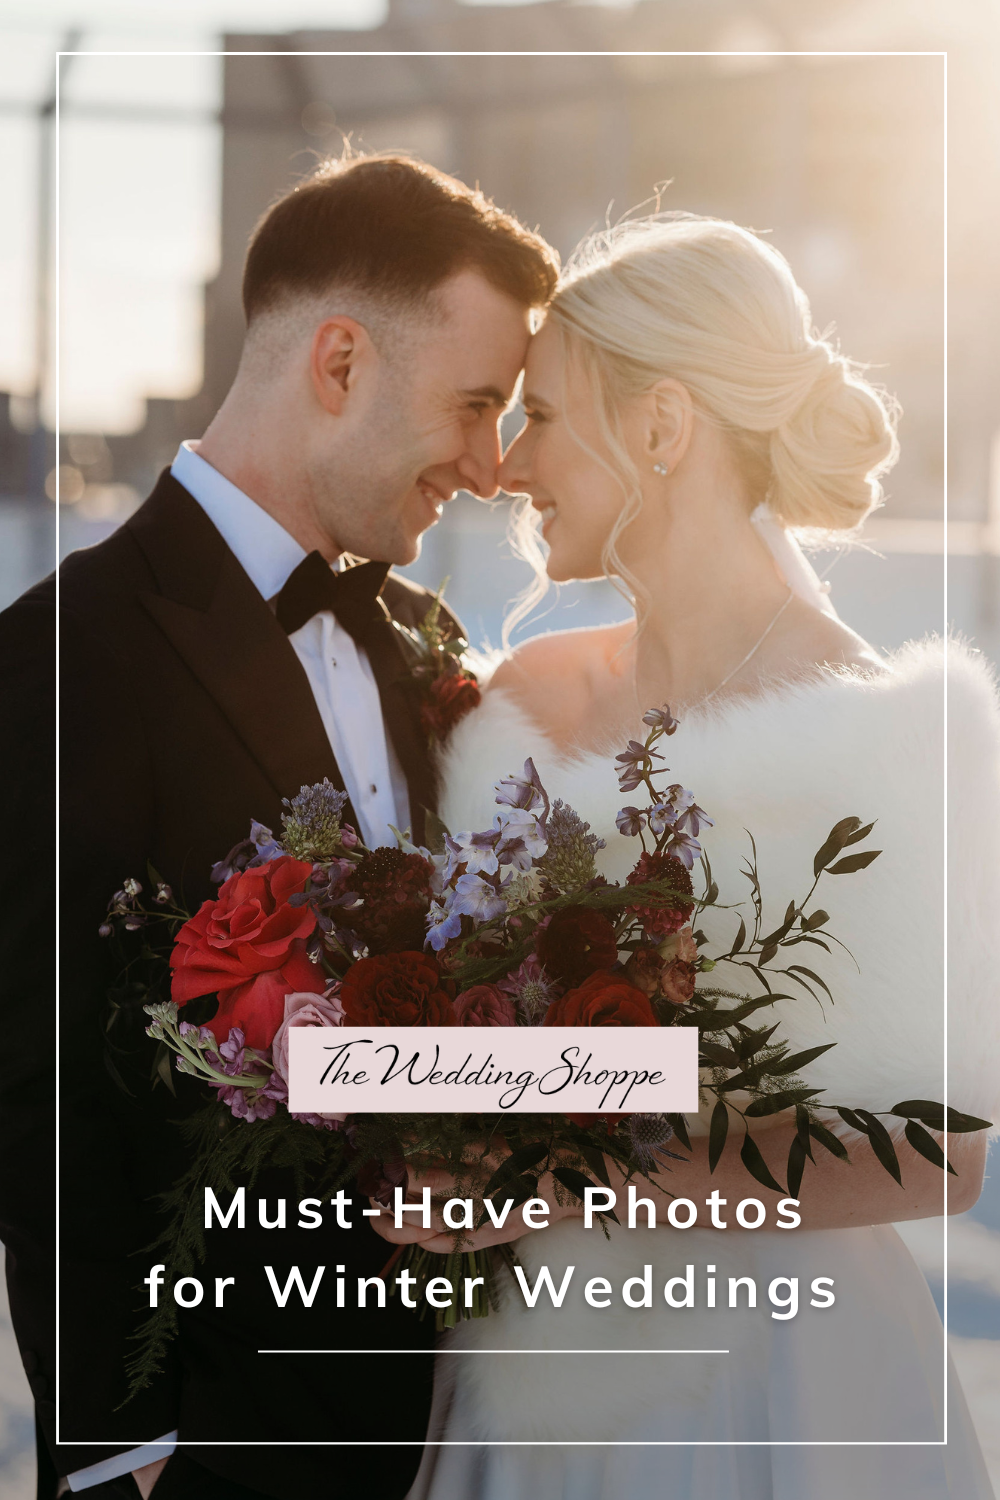 blog post graphic for "Must-Have Photos for Winter Weddings"